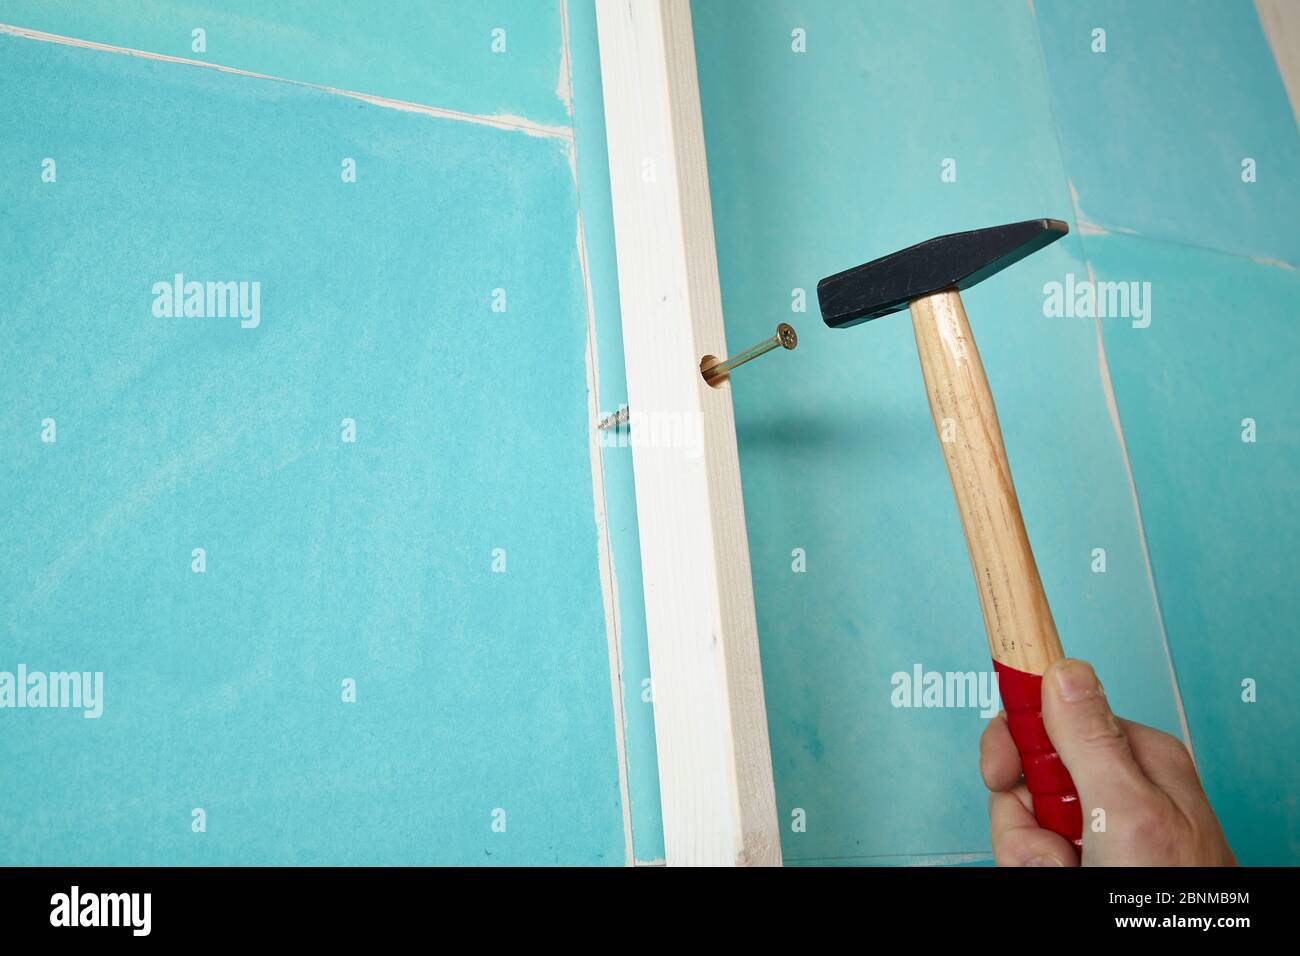 DIY wall design 02, step-by-step do-it-yourself production, various turquoise colored areas separated by white wooden strips, Step 09: Mark the drilling points in the wall for attachment to the strips, strike with a hammer on the half-screwed screw Stock Photo